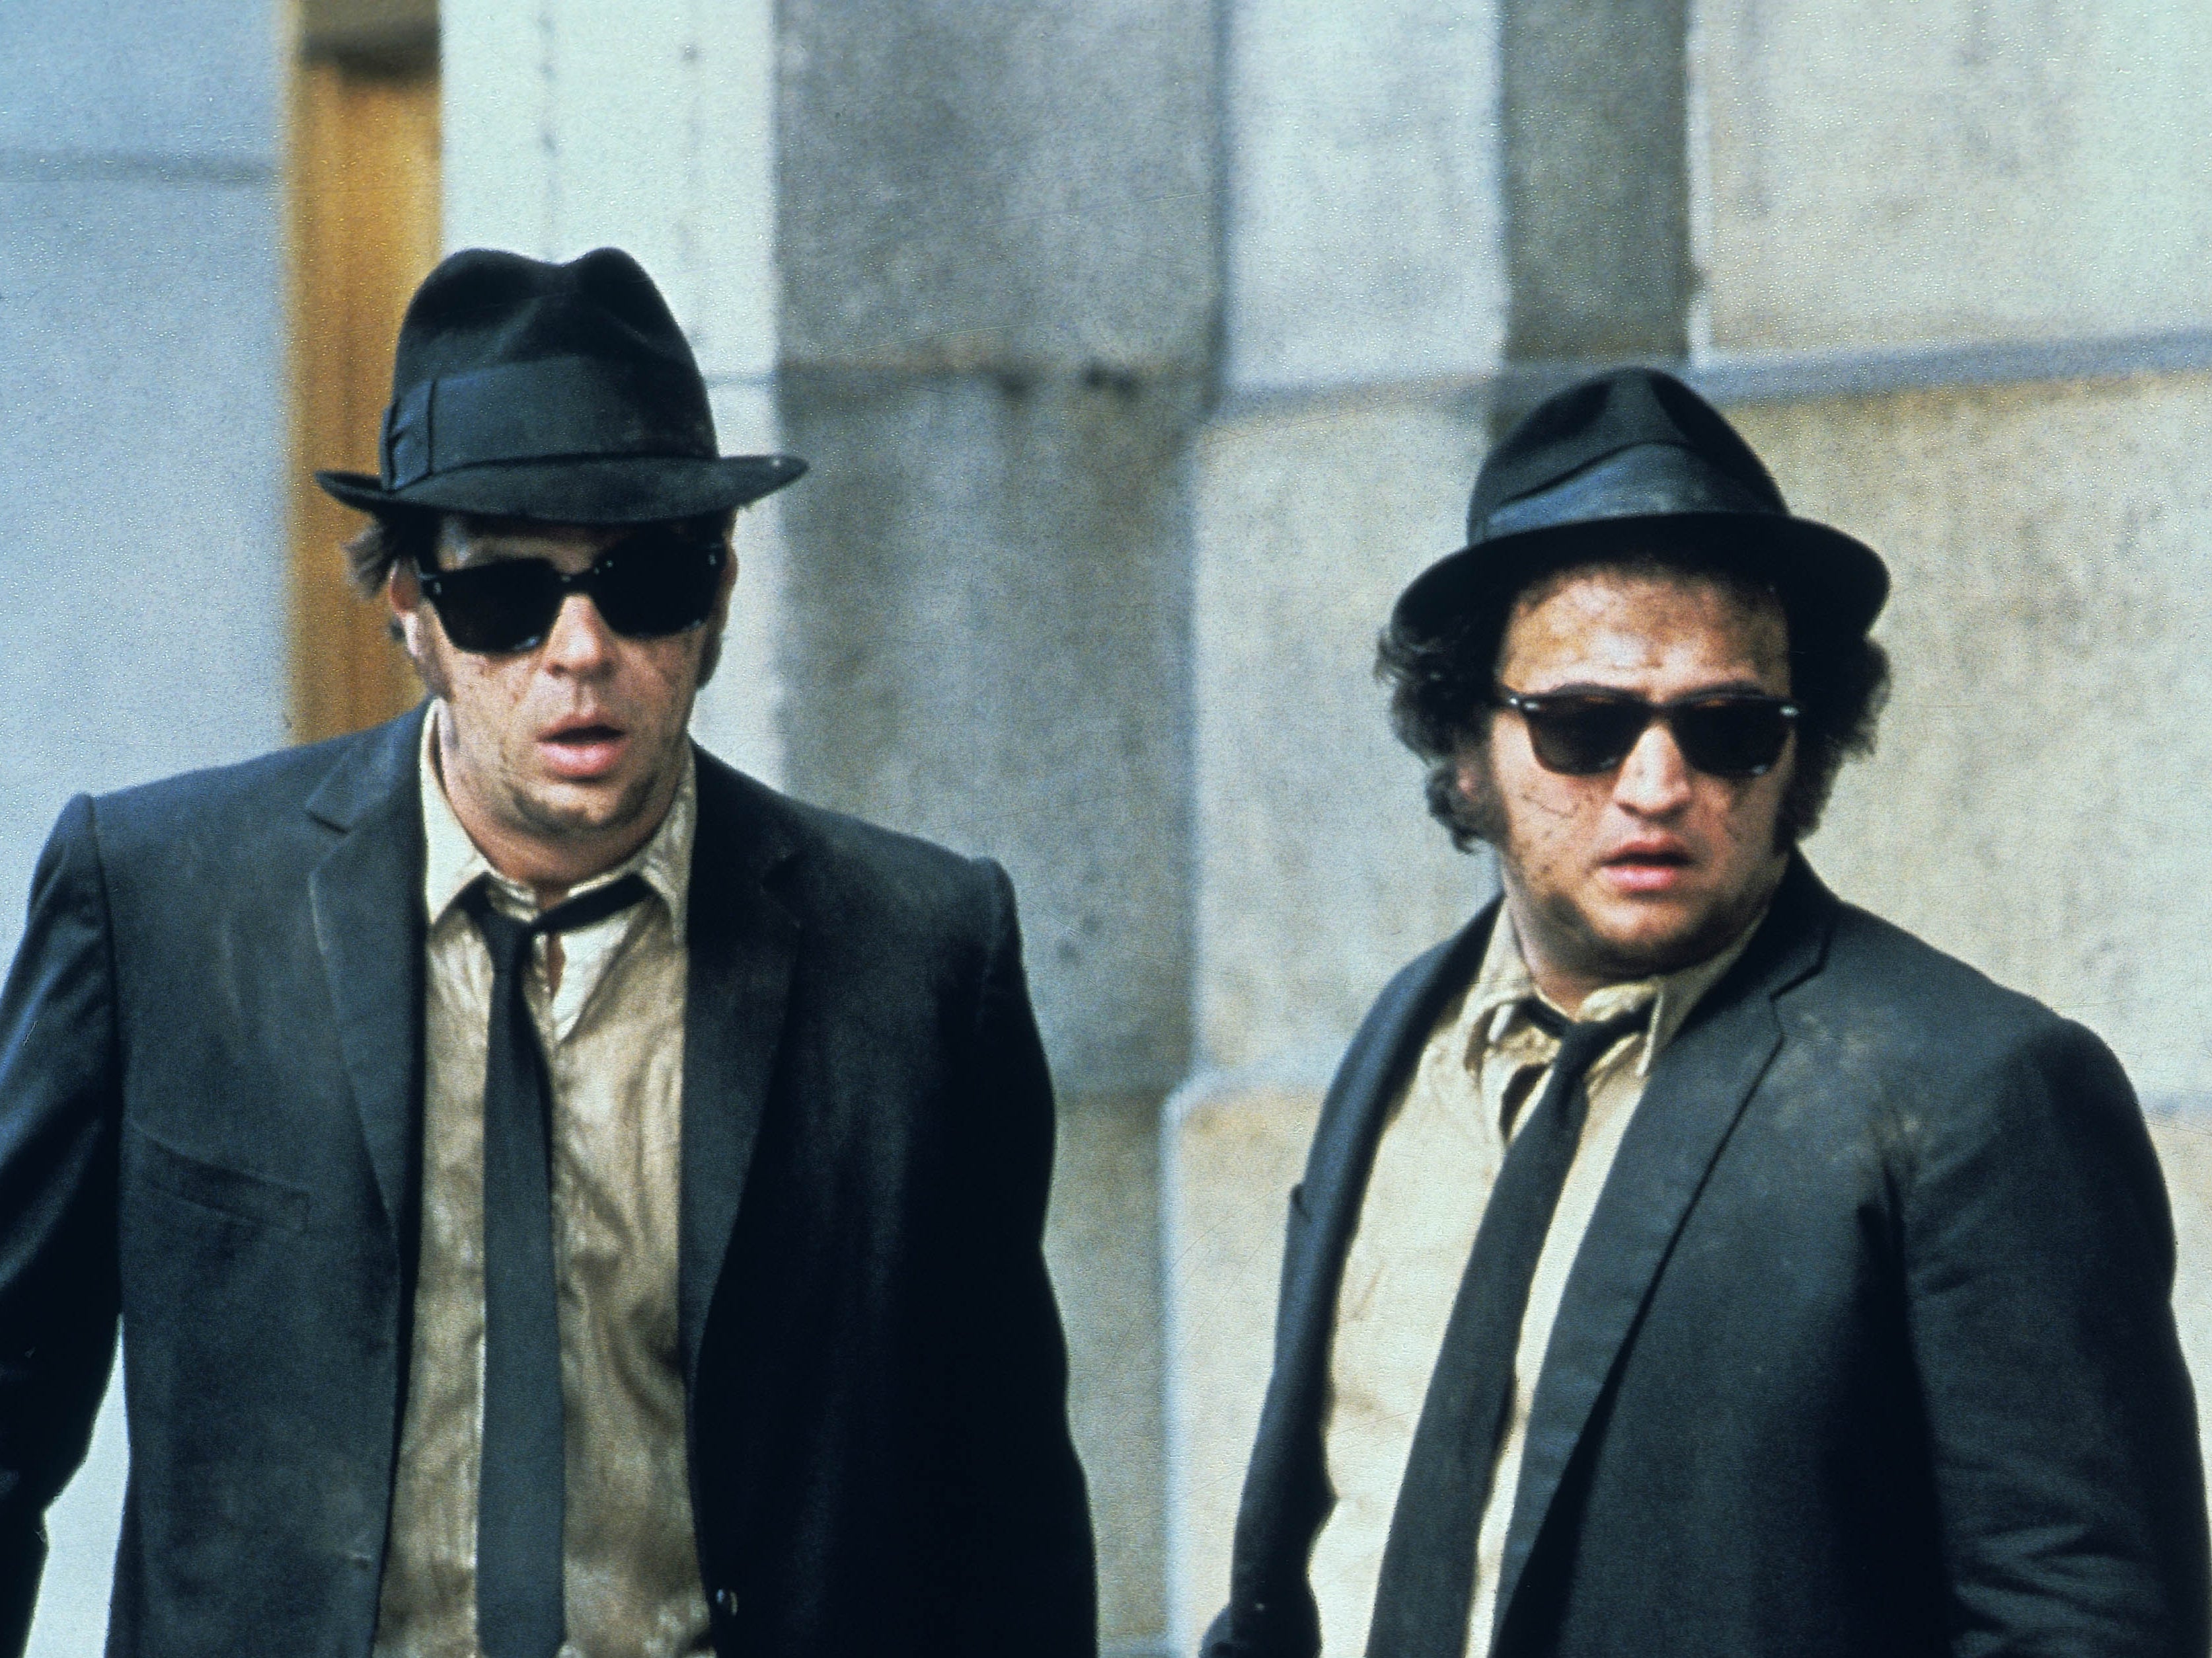 Soul boys: Aykroyd and Belushi in ‘The Blues Brothers’